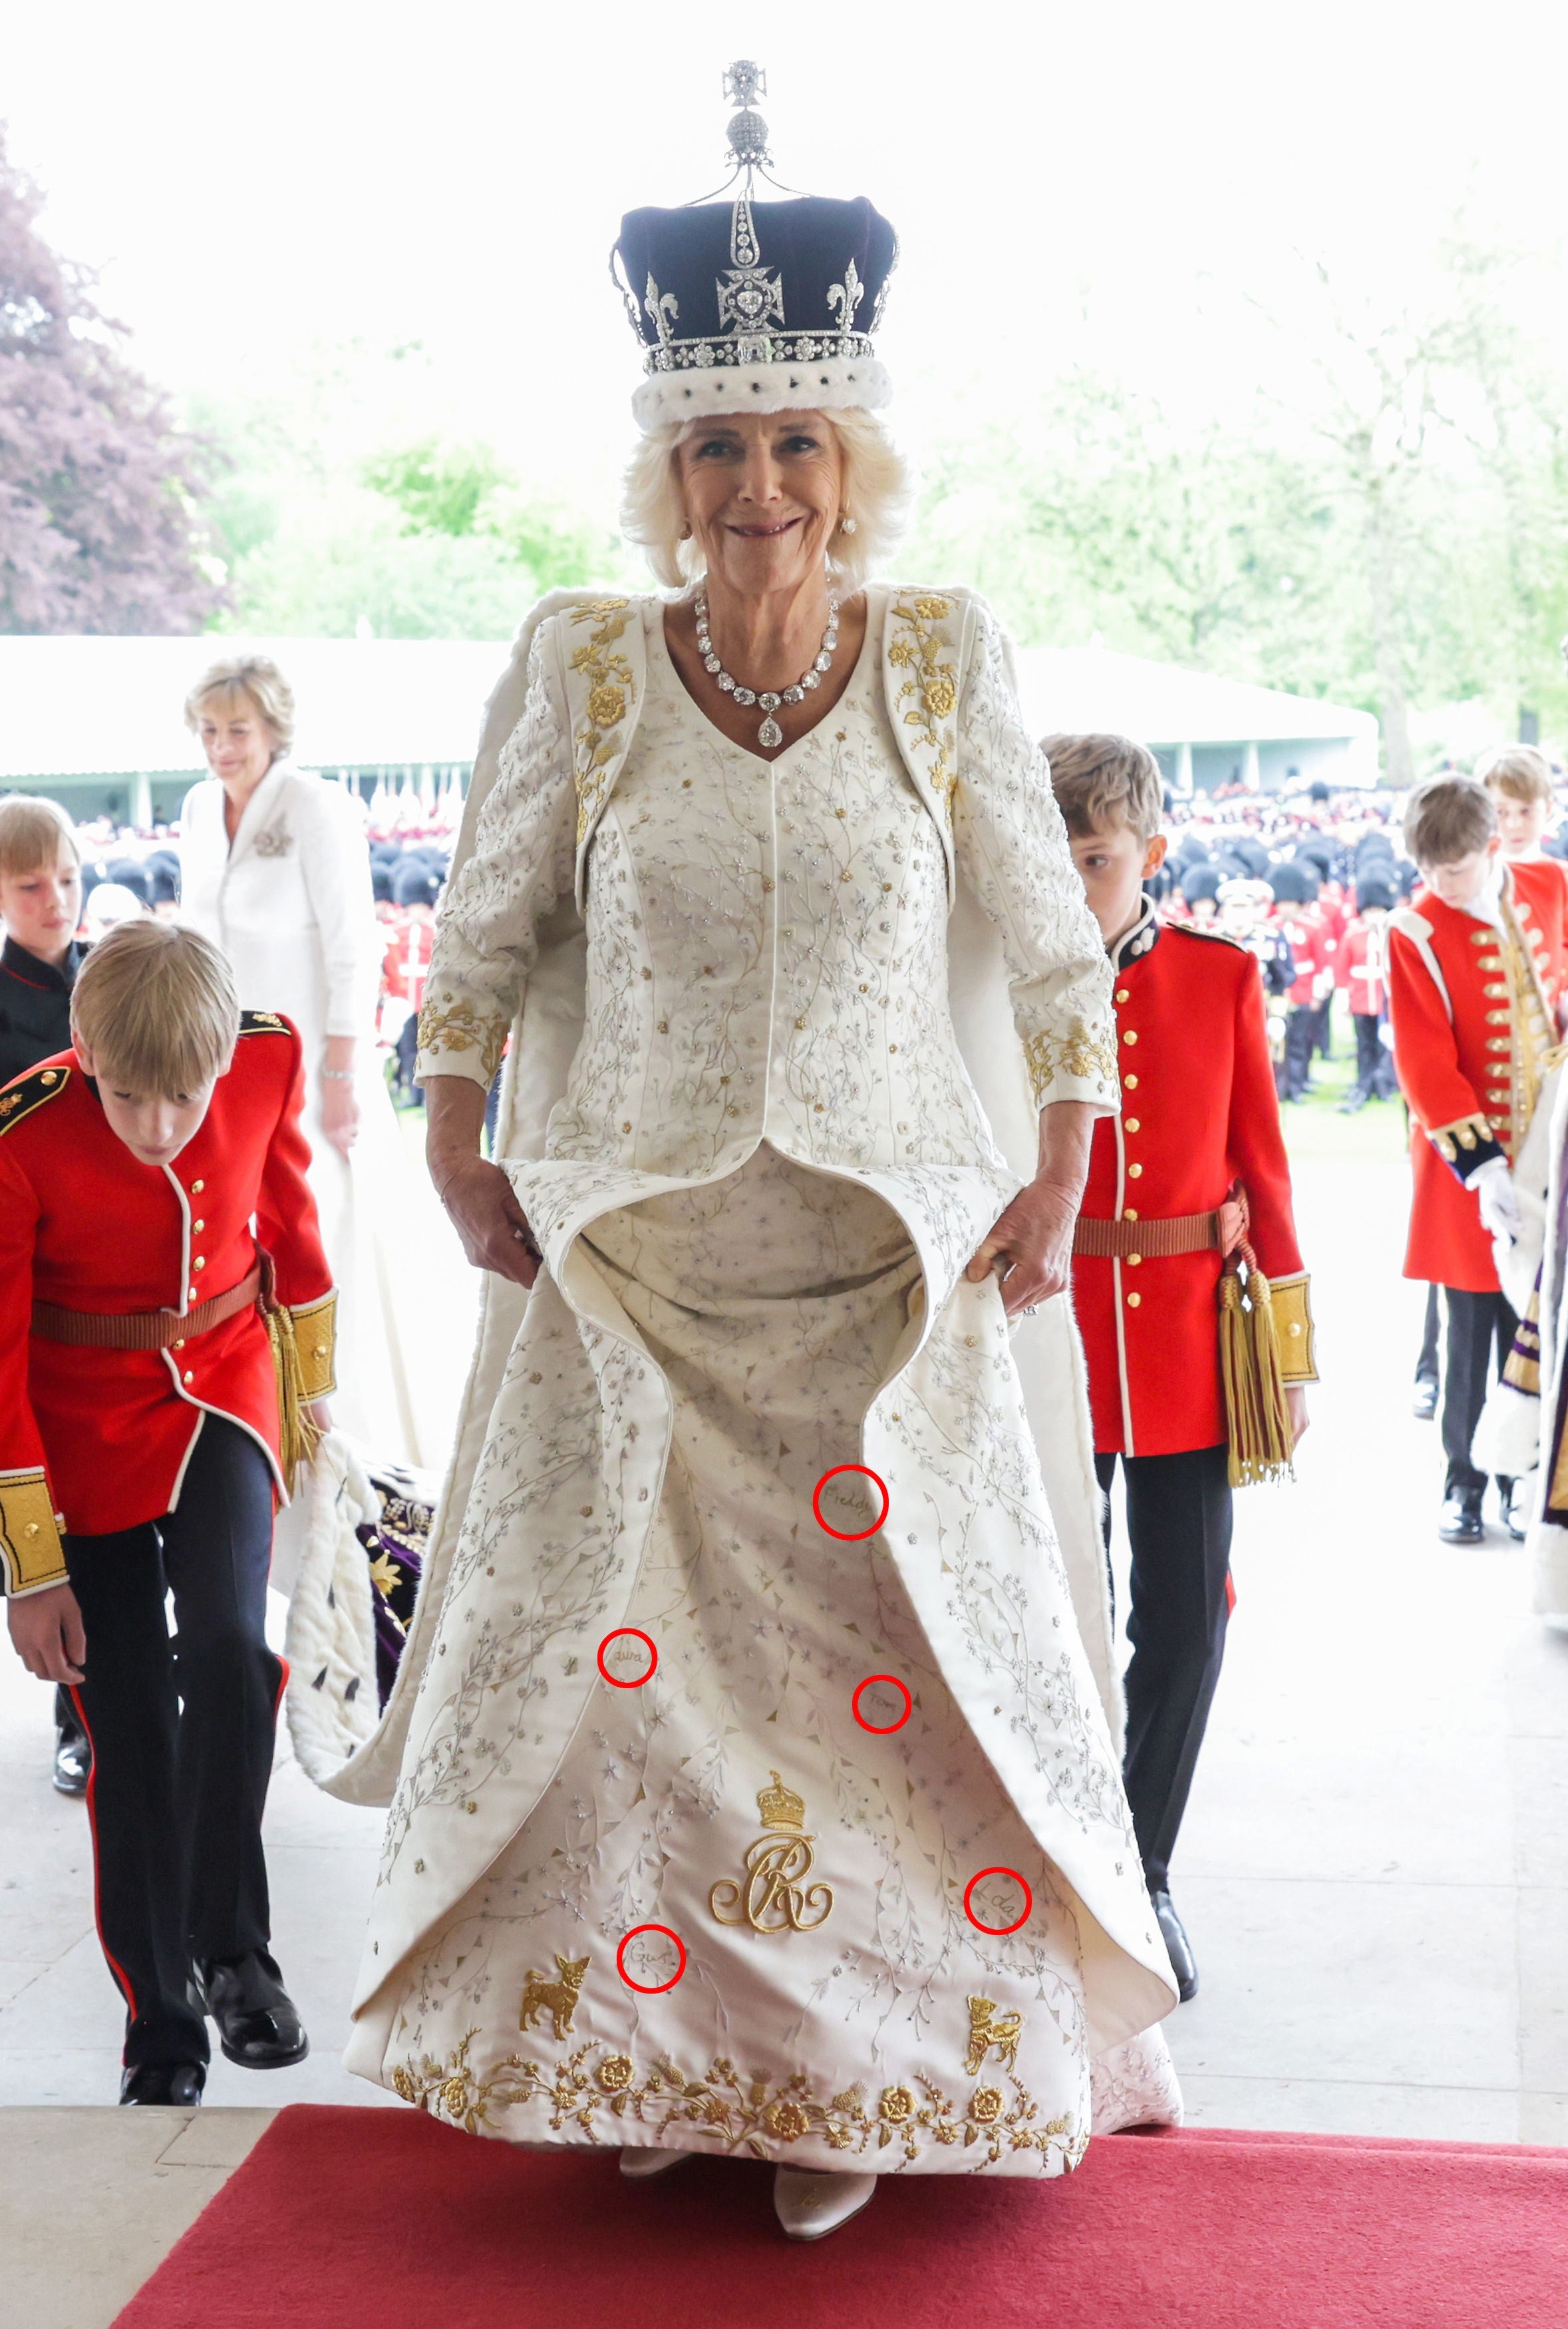 The secret names and themes embroidered into Camilla’s…